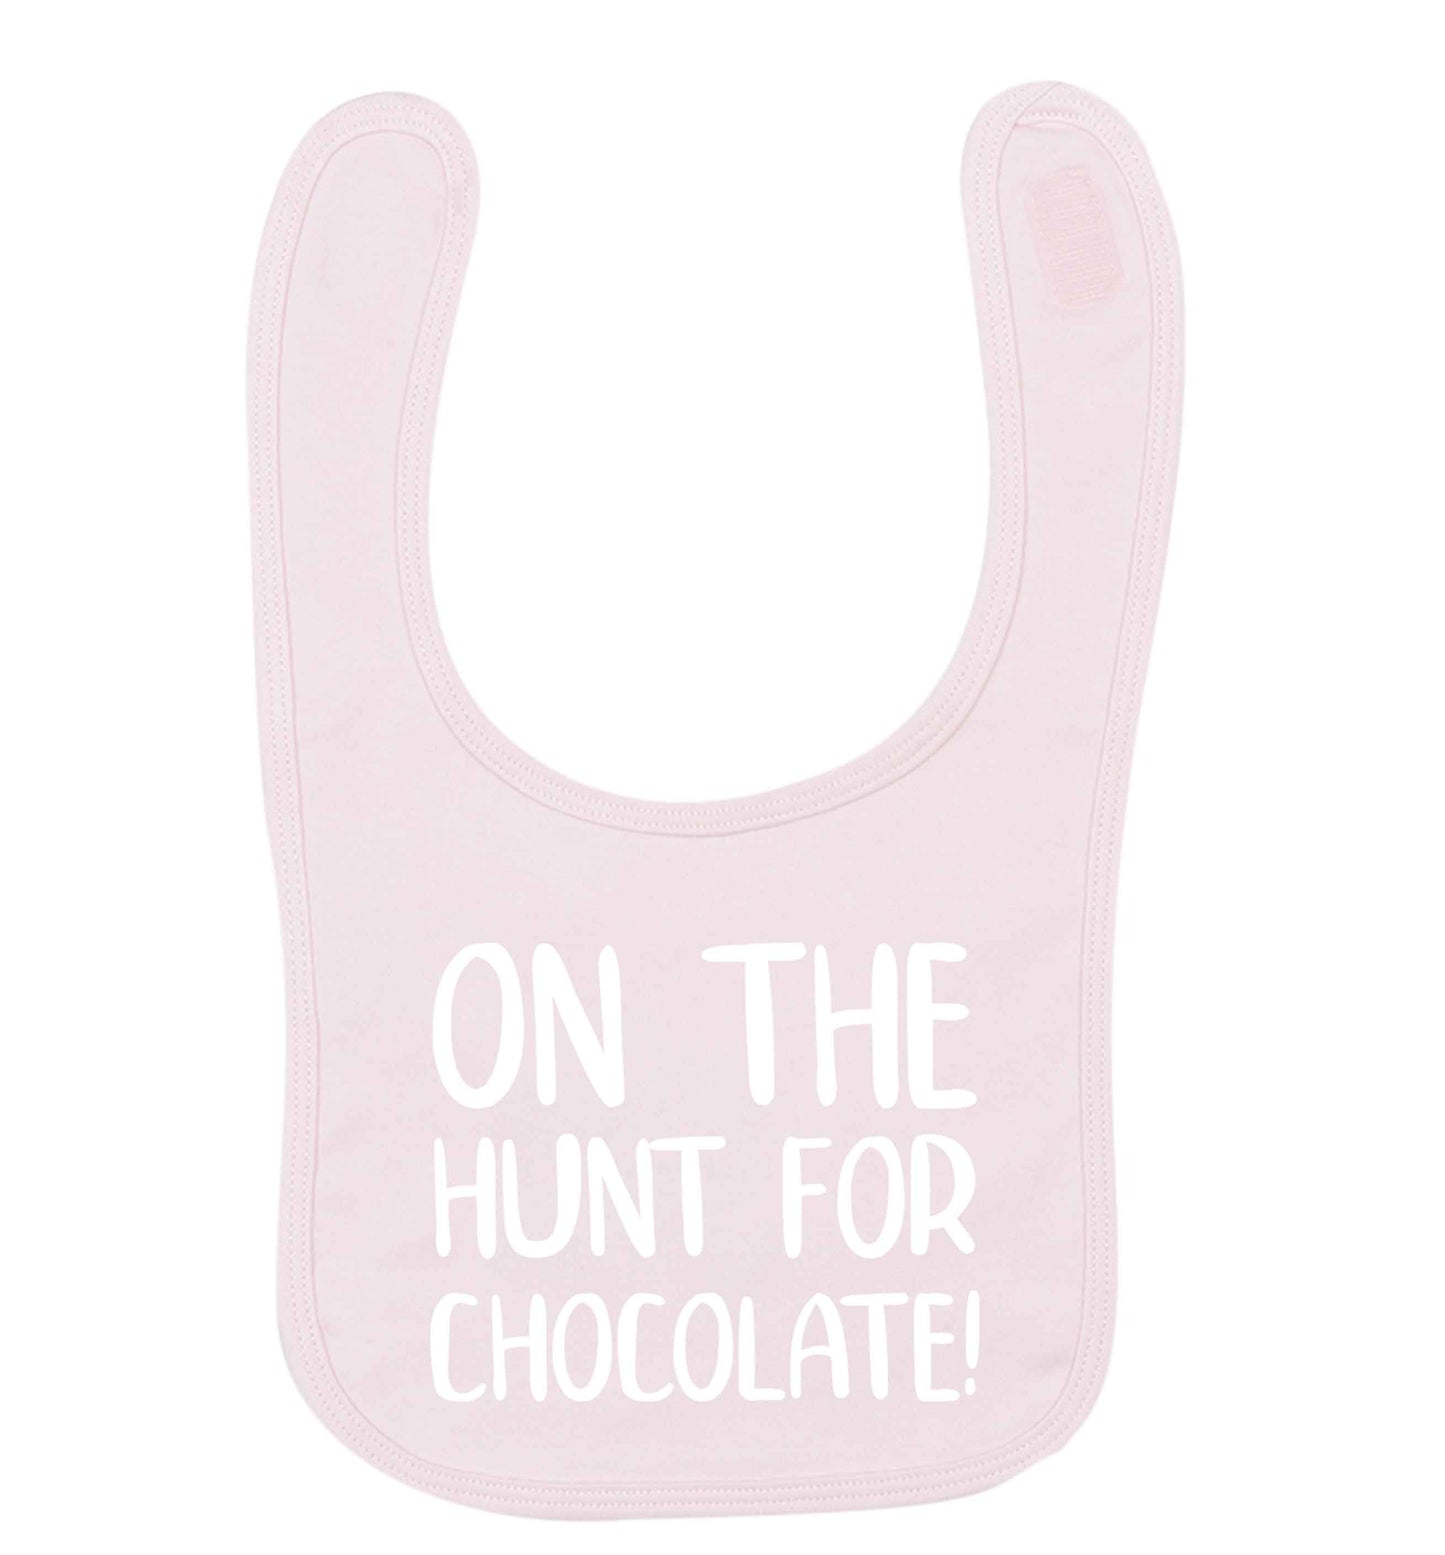 On the hunt for chocolate! pale pink baby bib